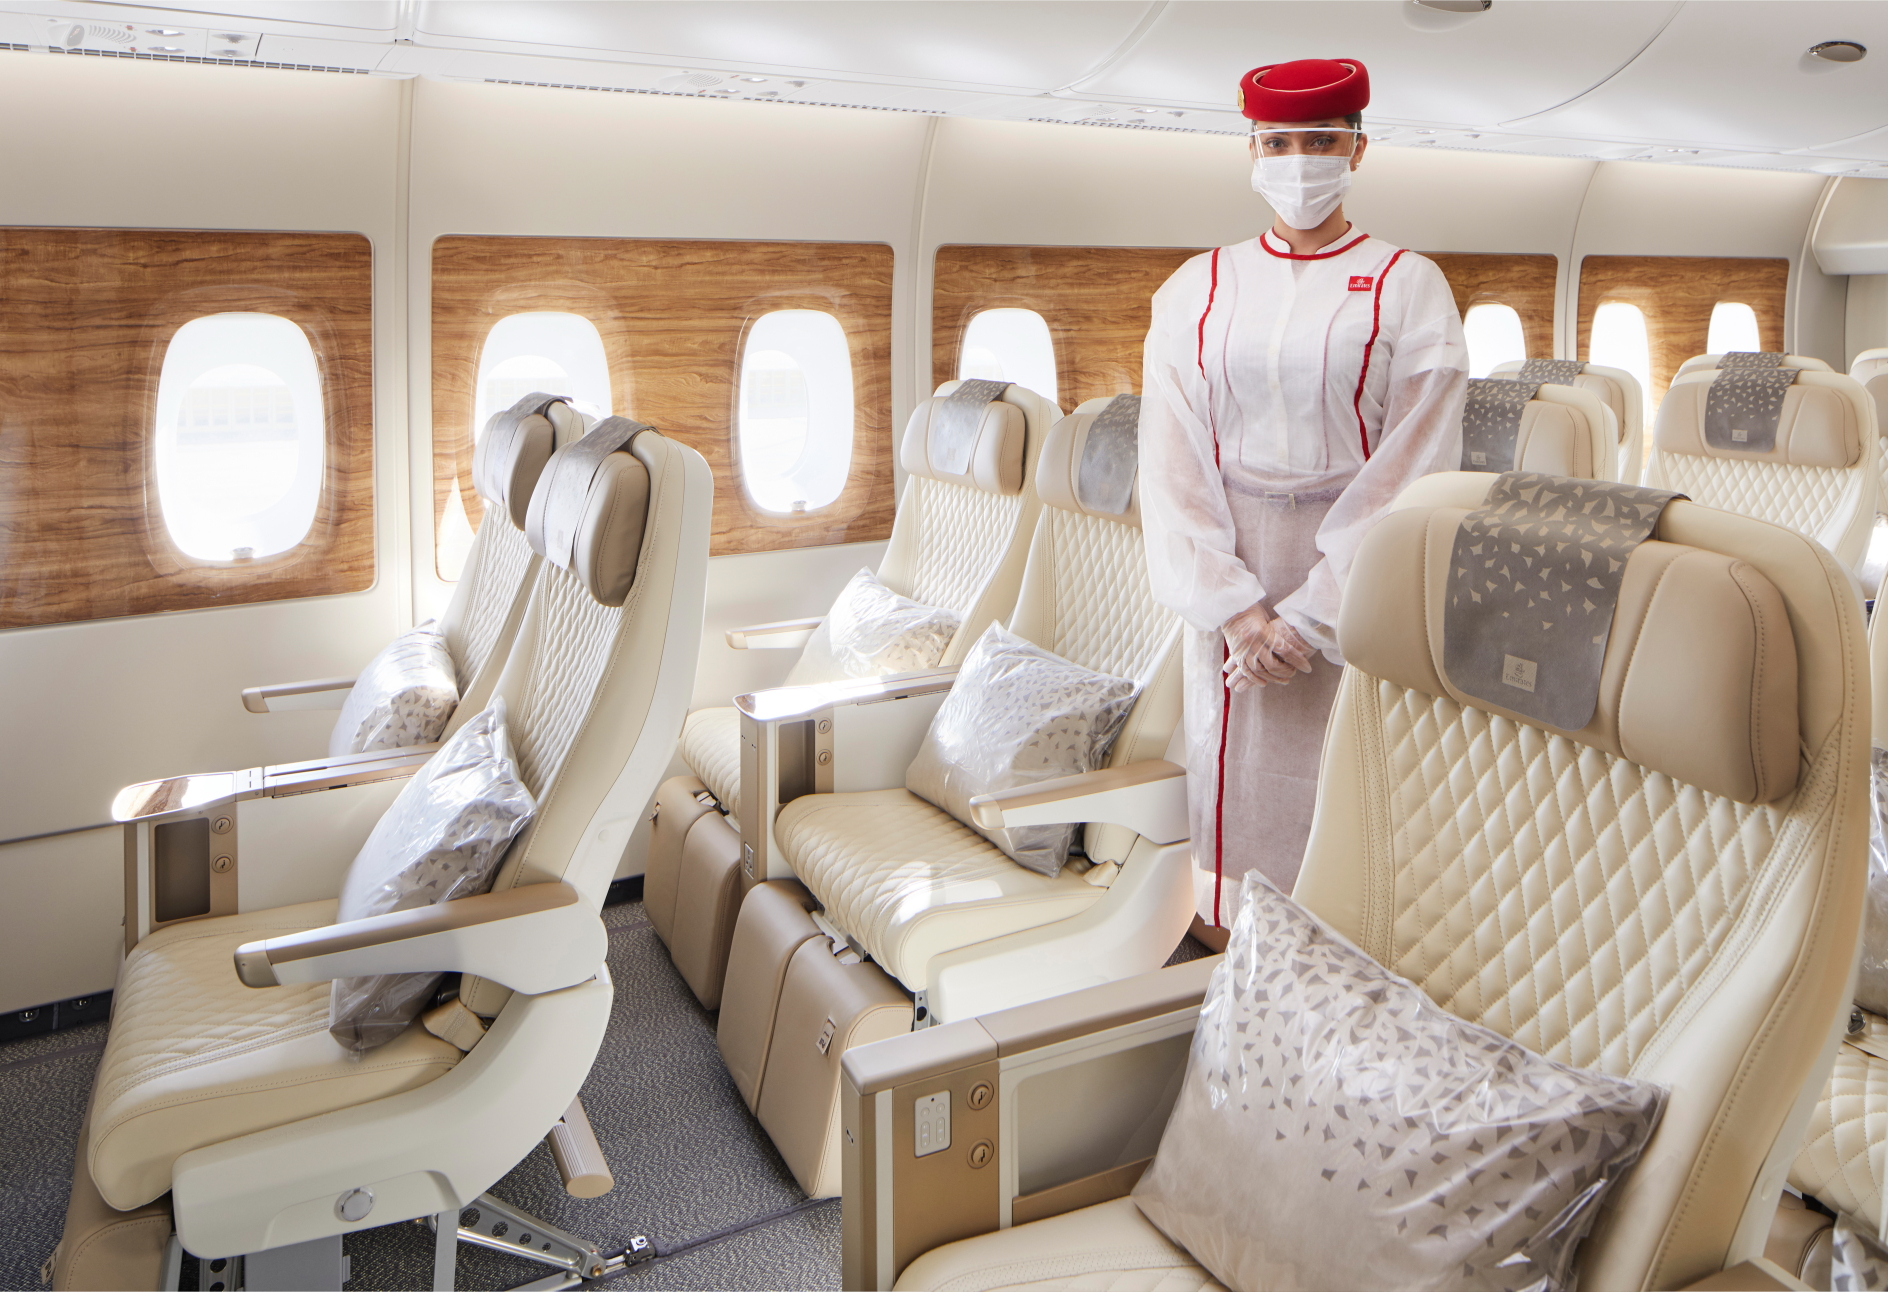 Emirates will showcase its new Premium Economy seats at the Arabian Travel Market 2021 (ATM) from 16-19 May. Click to enlarge.